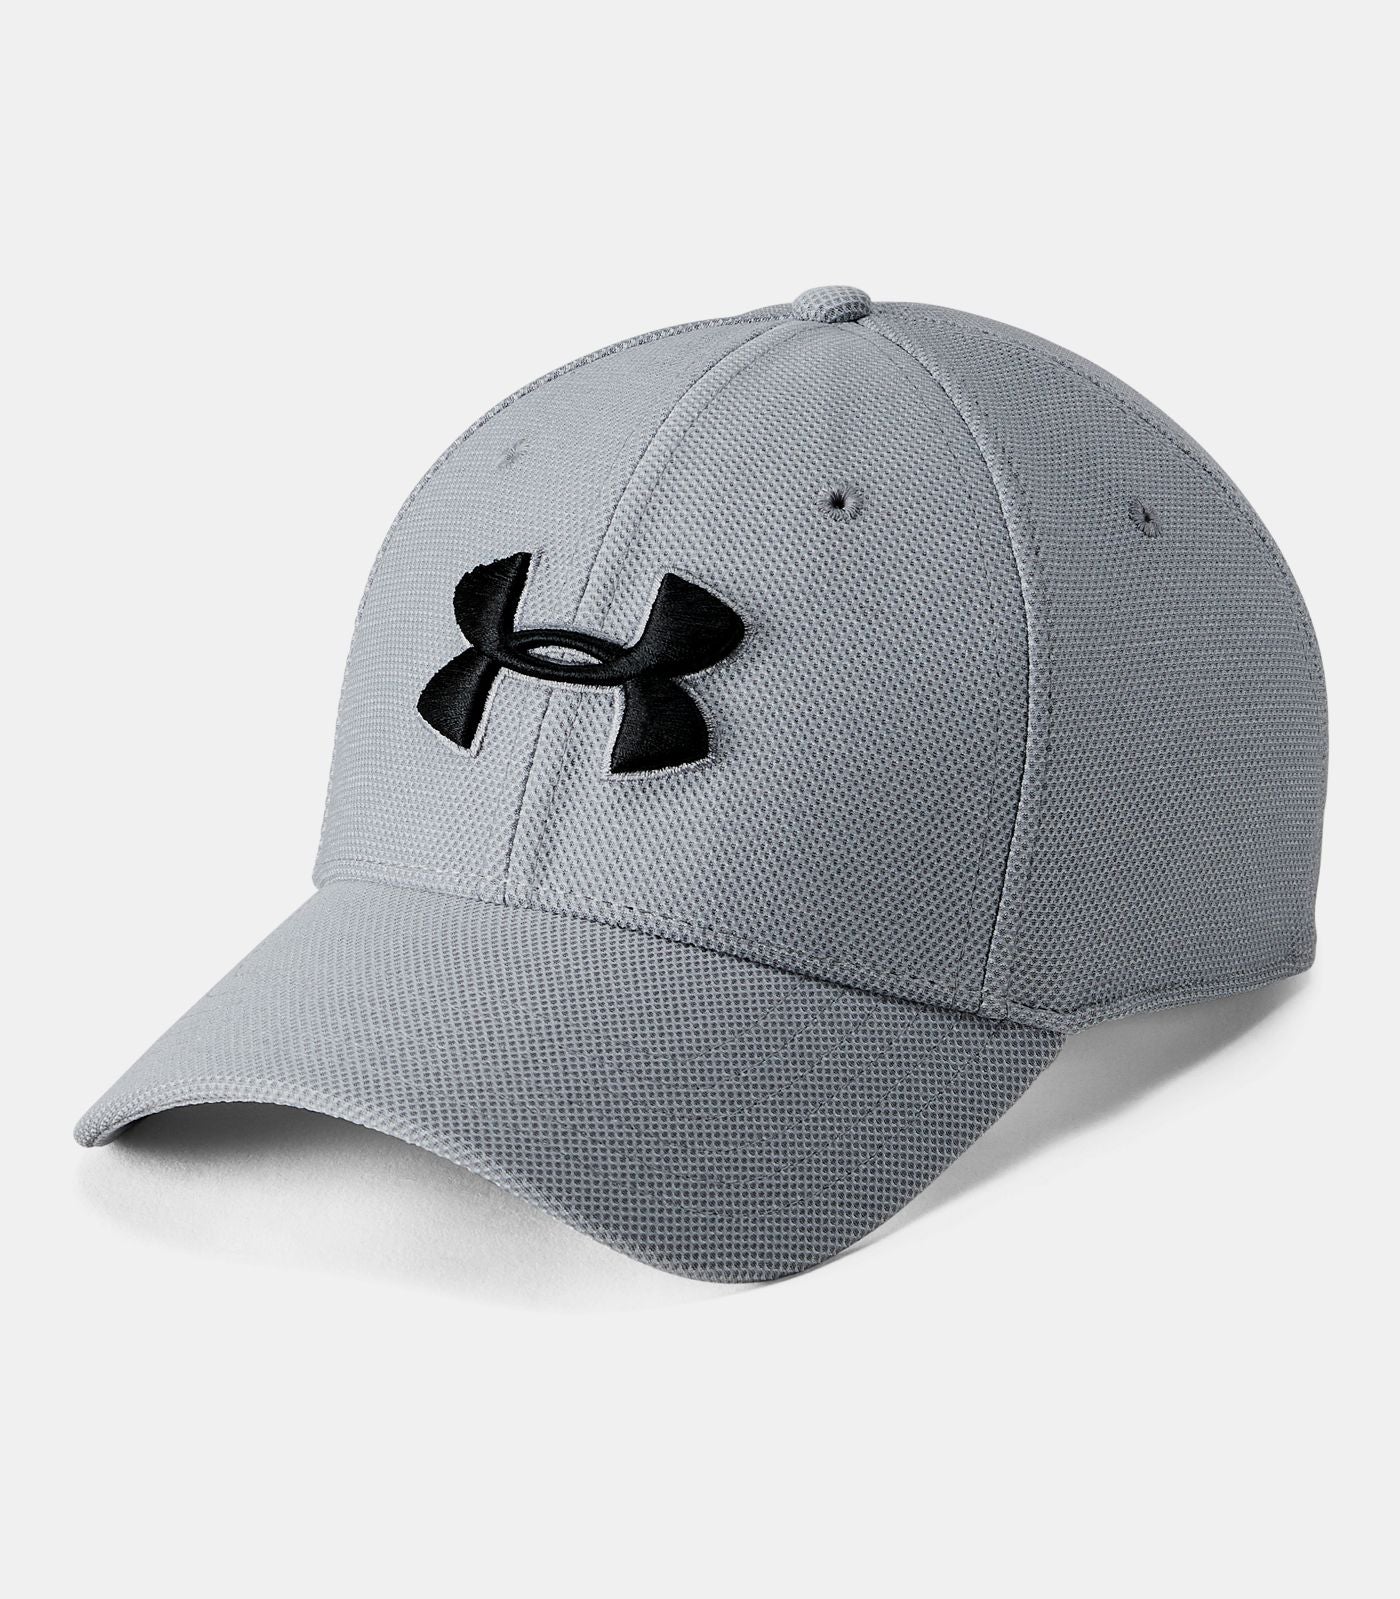 Heathered Blitzing 3.0 Cap by Under Armour 1305037-035